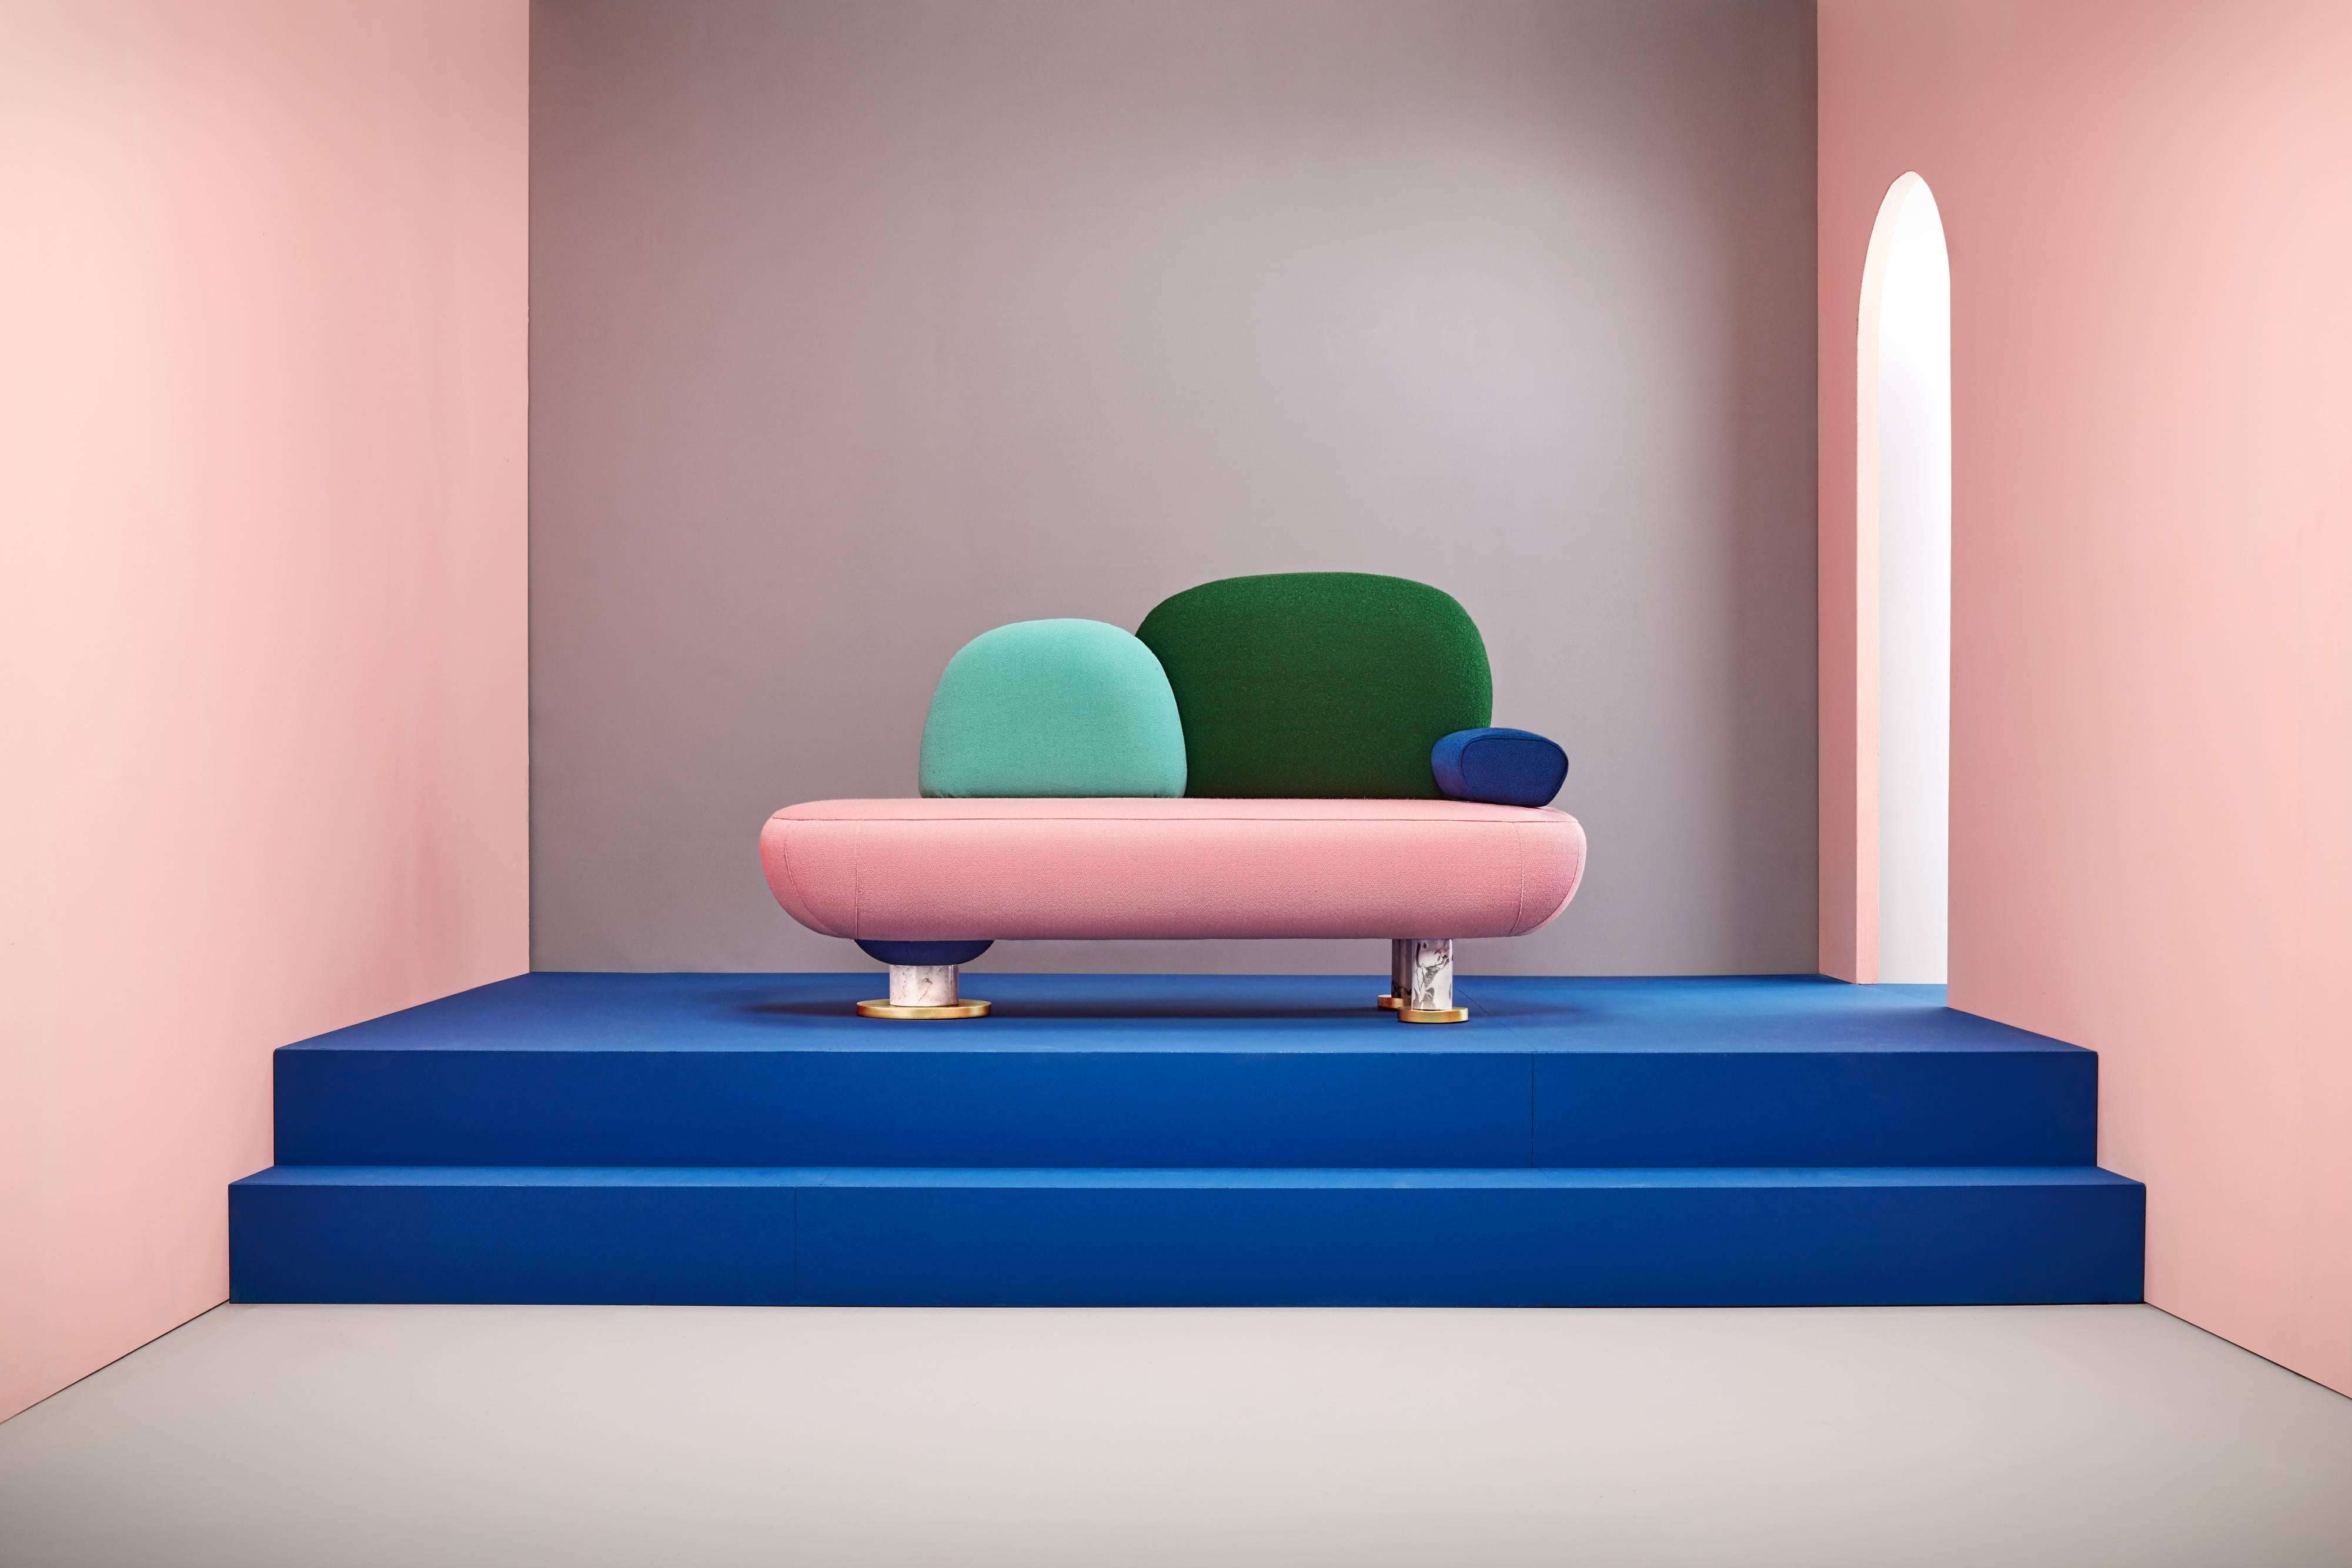 Toadstool Collection sofa by Masquespacio

This collection of puffs, table, and sofa bench designed by Masquespacio is inspired by the visual culture and graphic design always present one way
or another in the creative consultancy projects. The